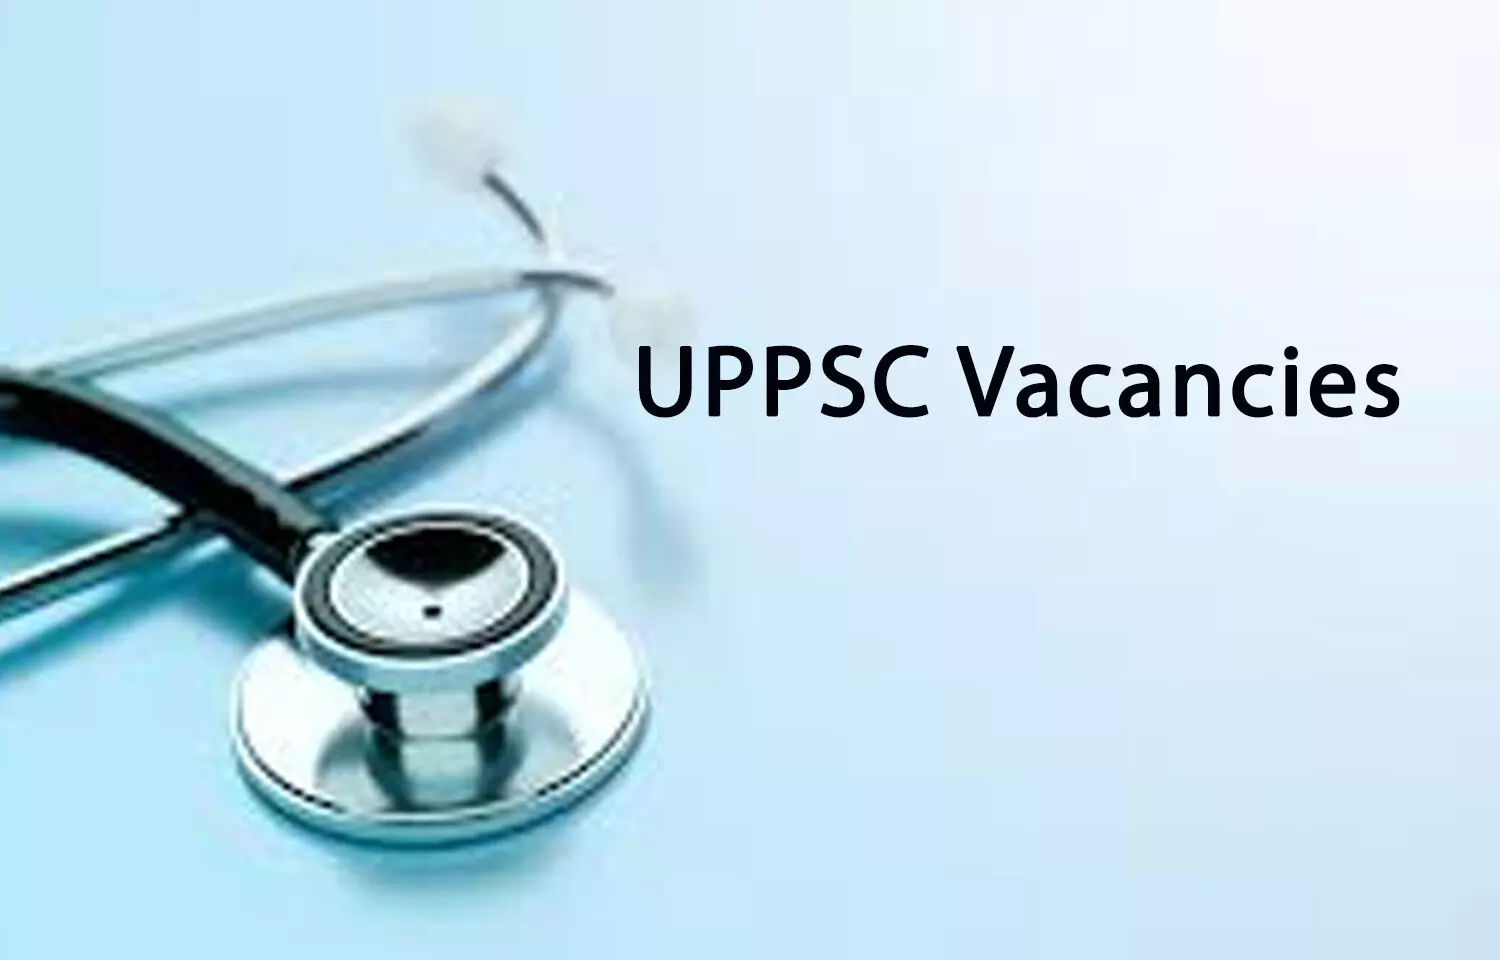 APPLY NOW: UPPSC Releases 316 Vacancies For Assistant Professor, Allopath Medical Officer Posts